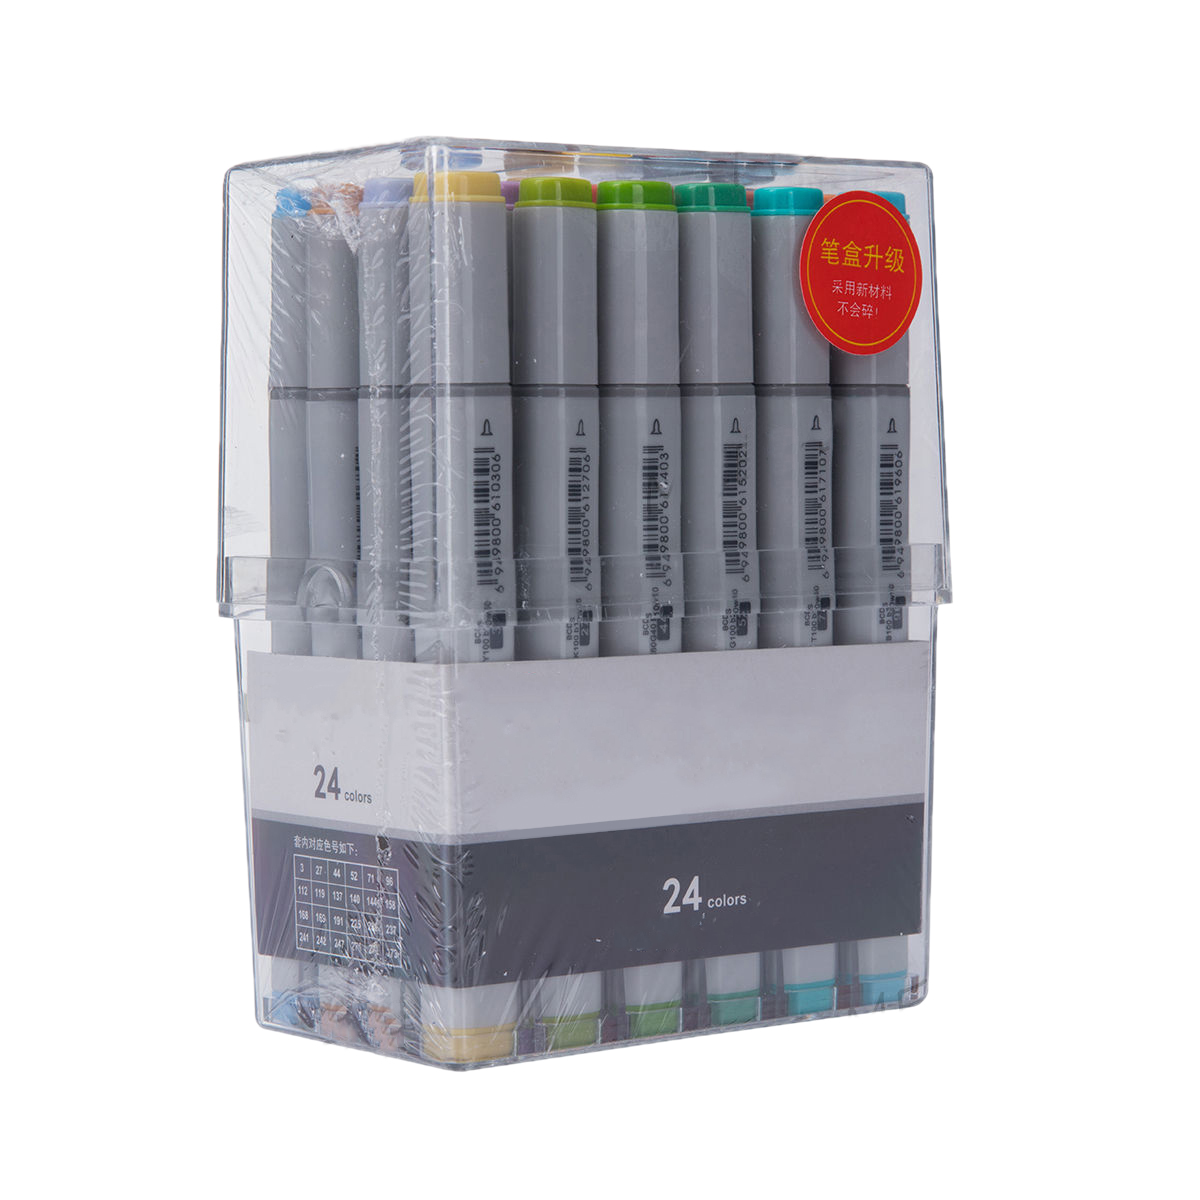 

24 Colors Double Headed Alcoholic Oily Art Markers Pen Broad And Fine Nibs Mark Pen School